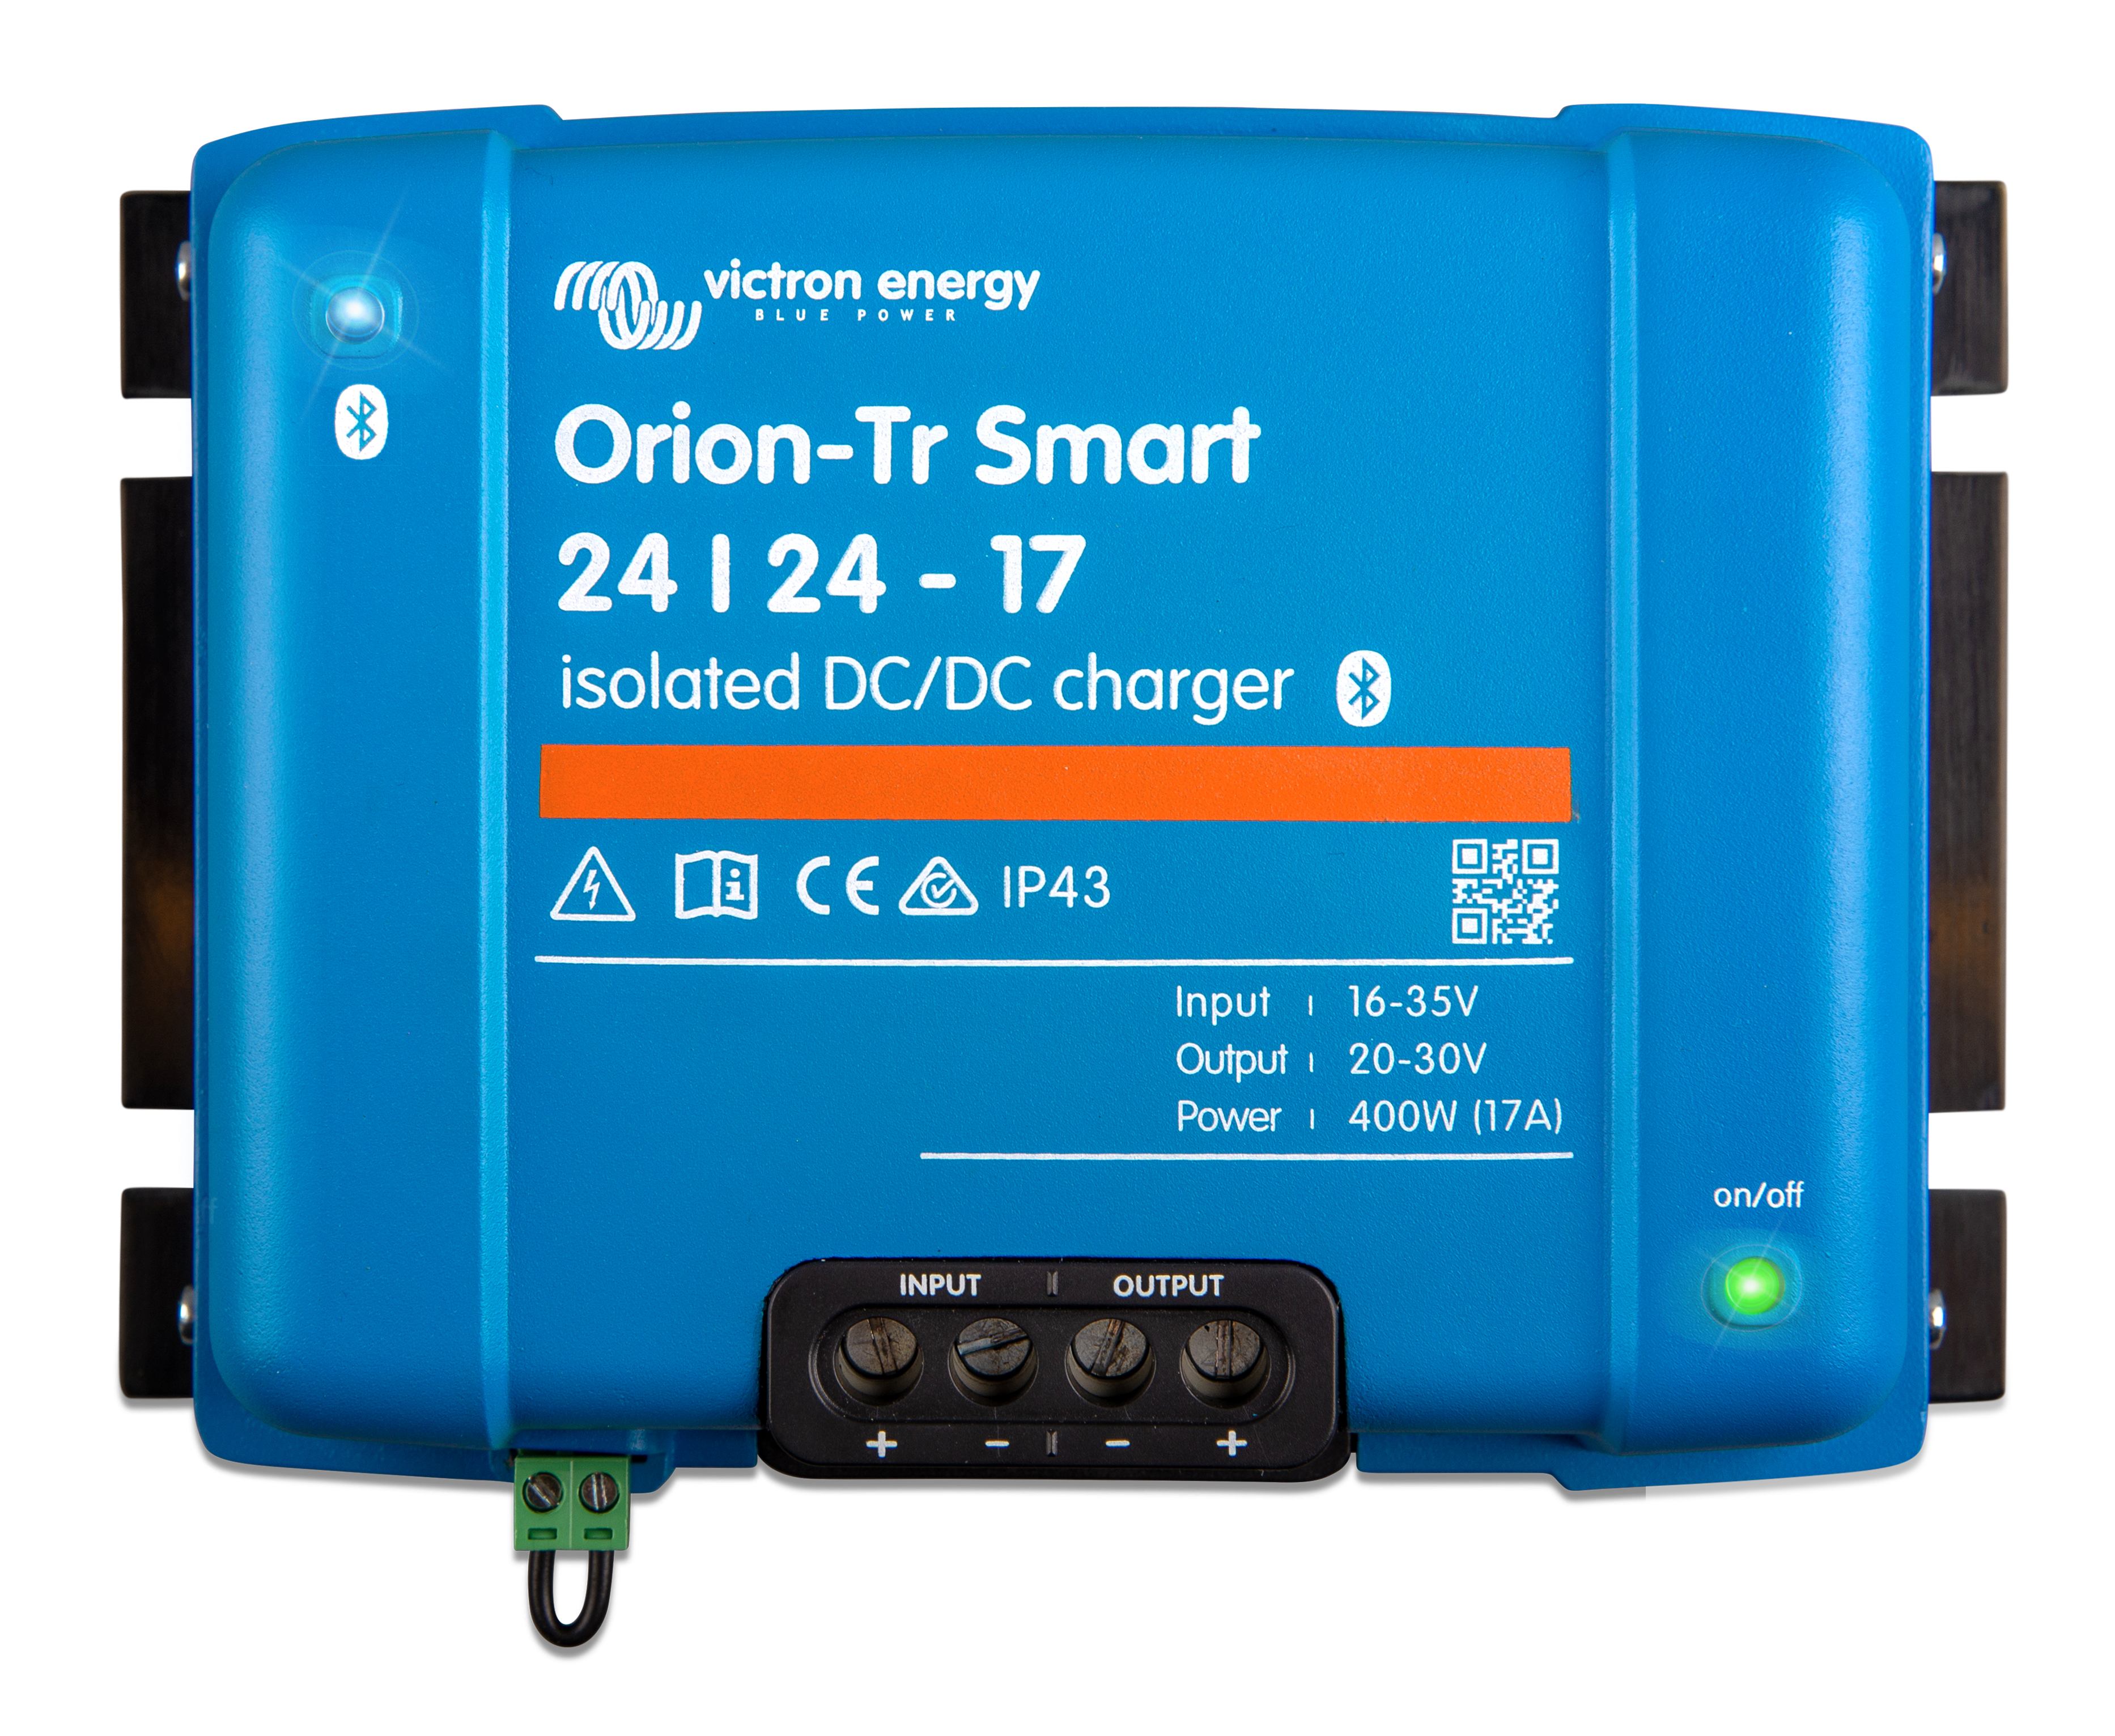 What's the output voltage and current for the Victron Orion DC DC Charger